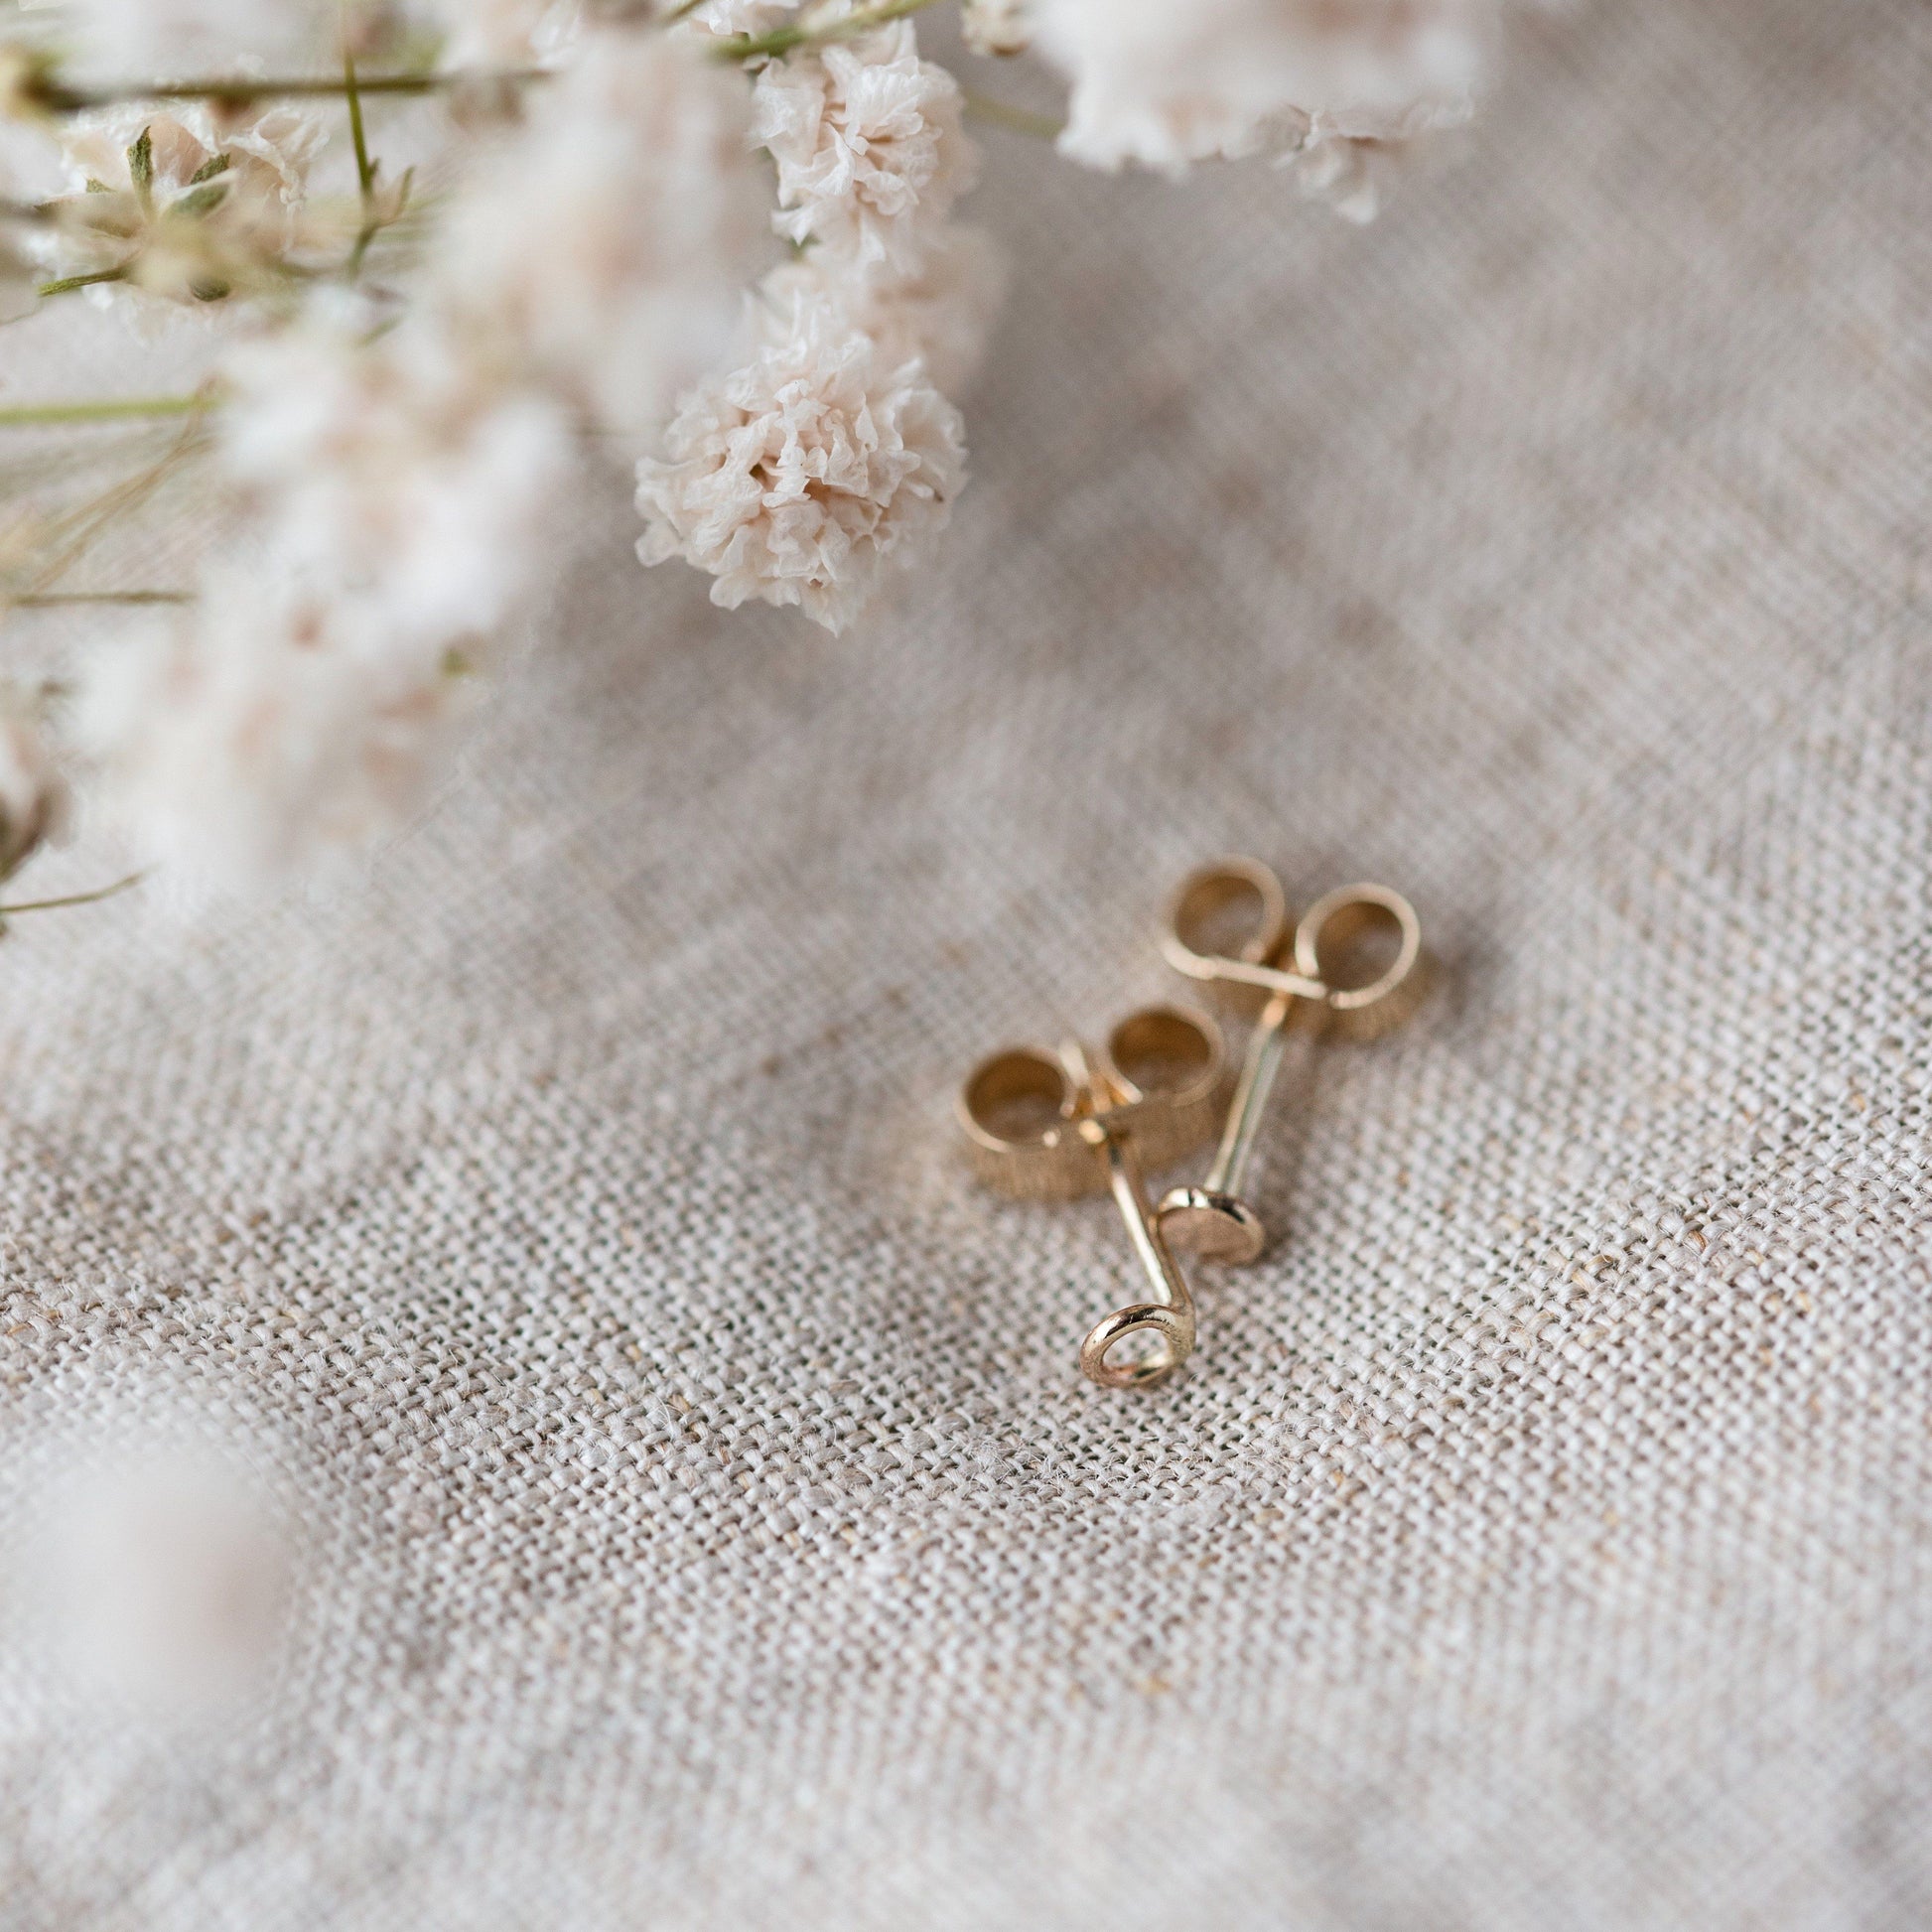 Mismatched Gold Studs - Tiny Circle and link Earrings Handmade by Anna Calvert Jewellery in the UK